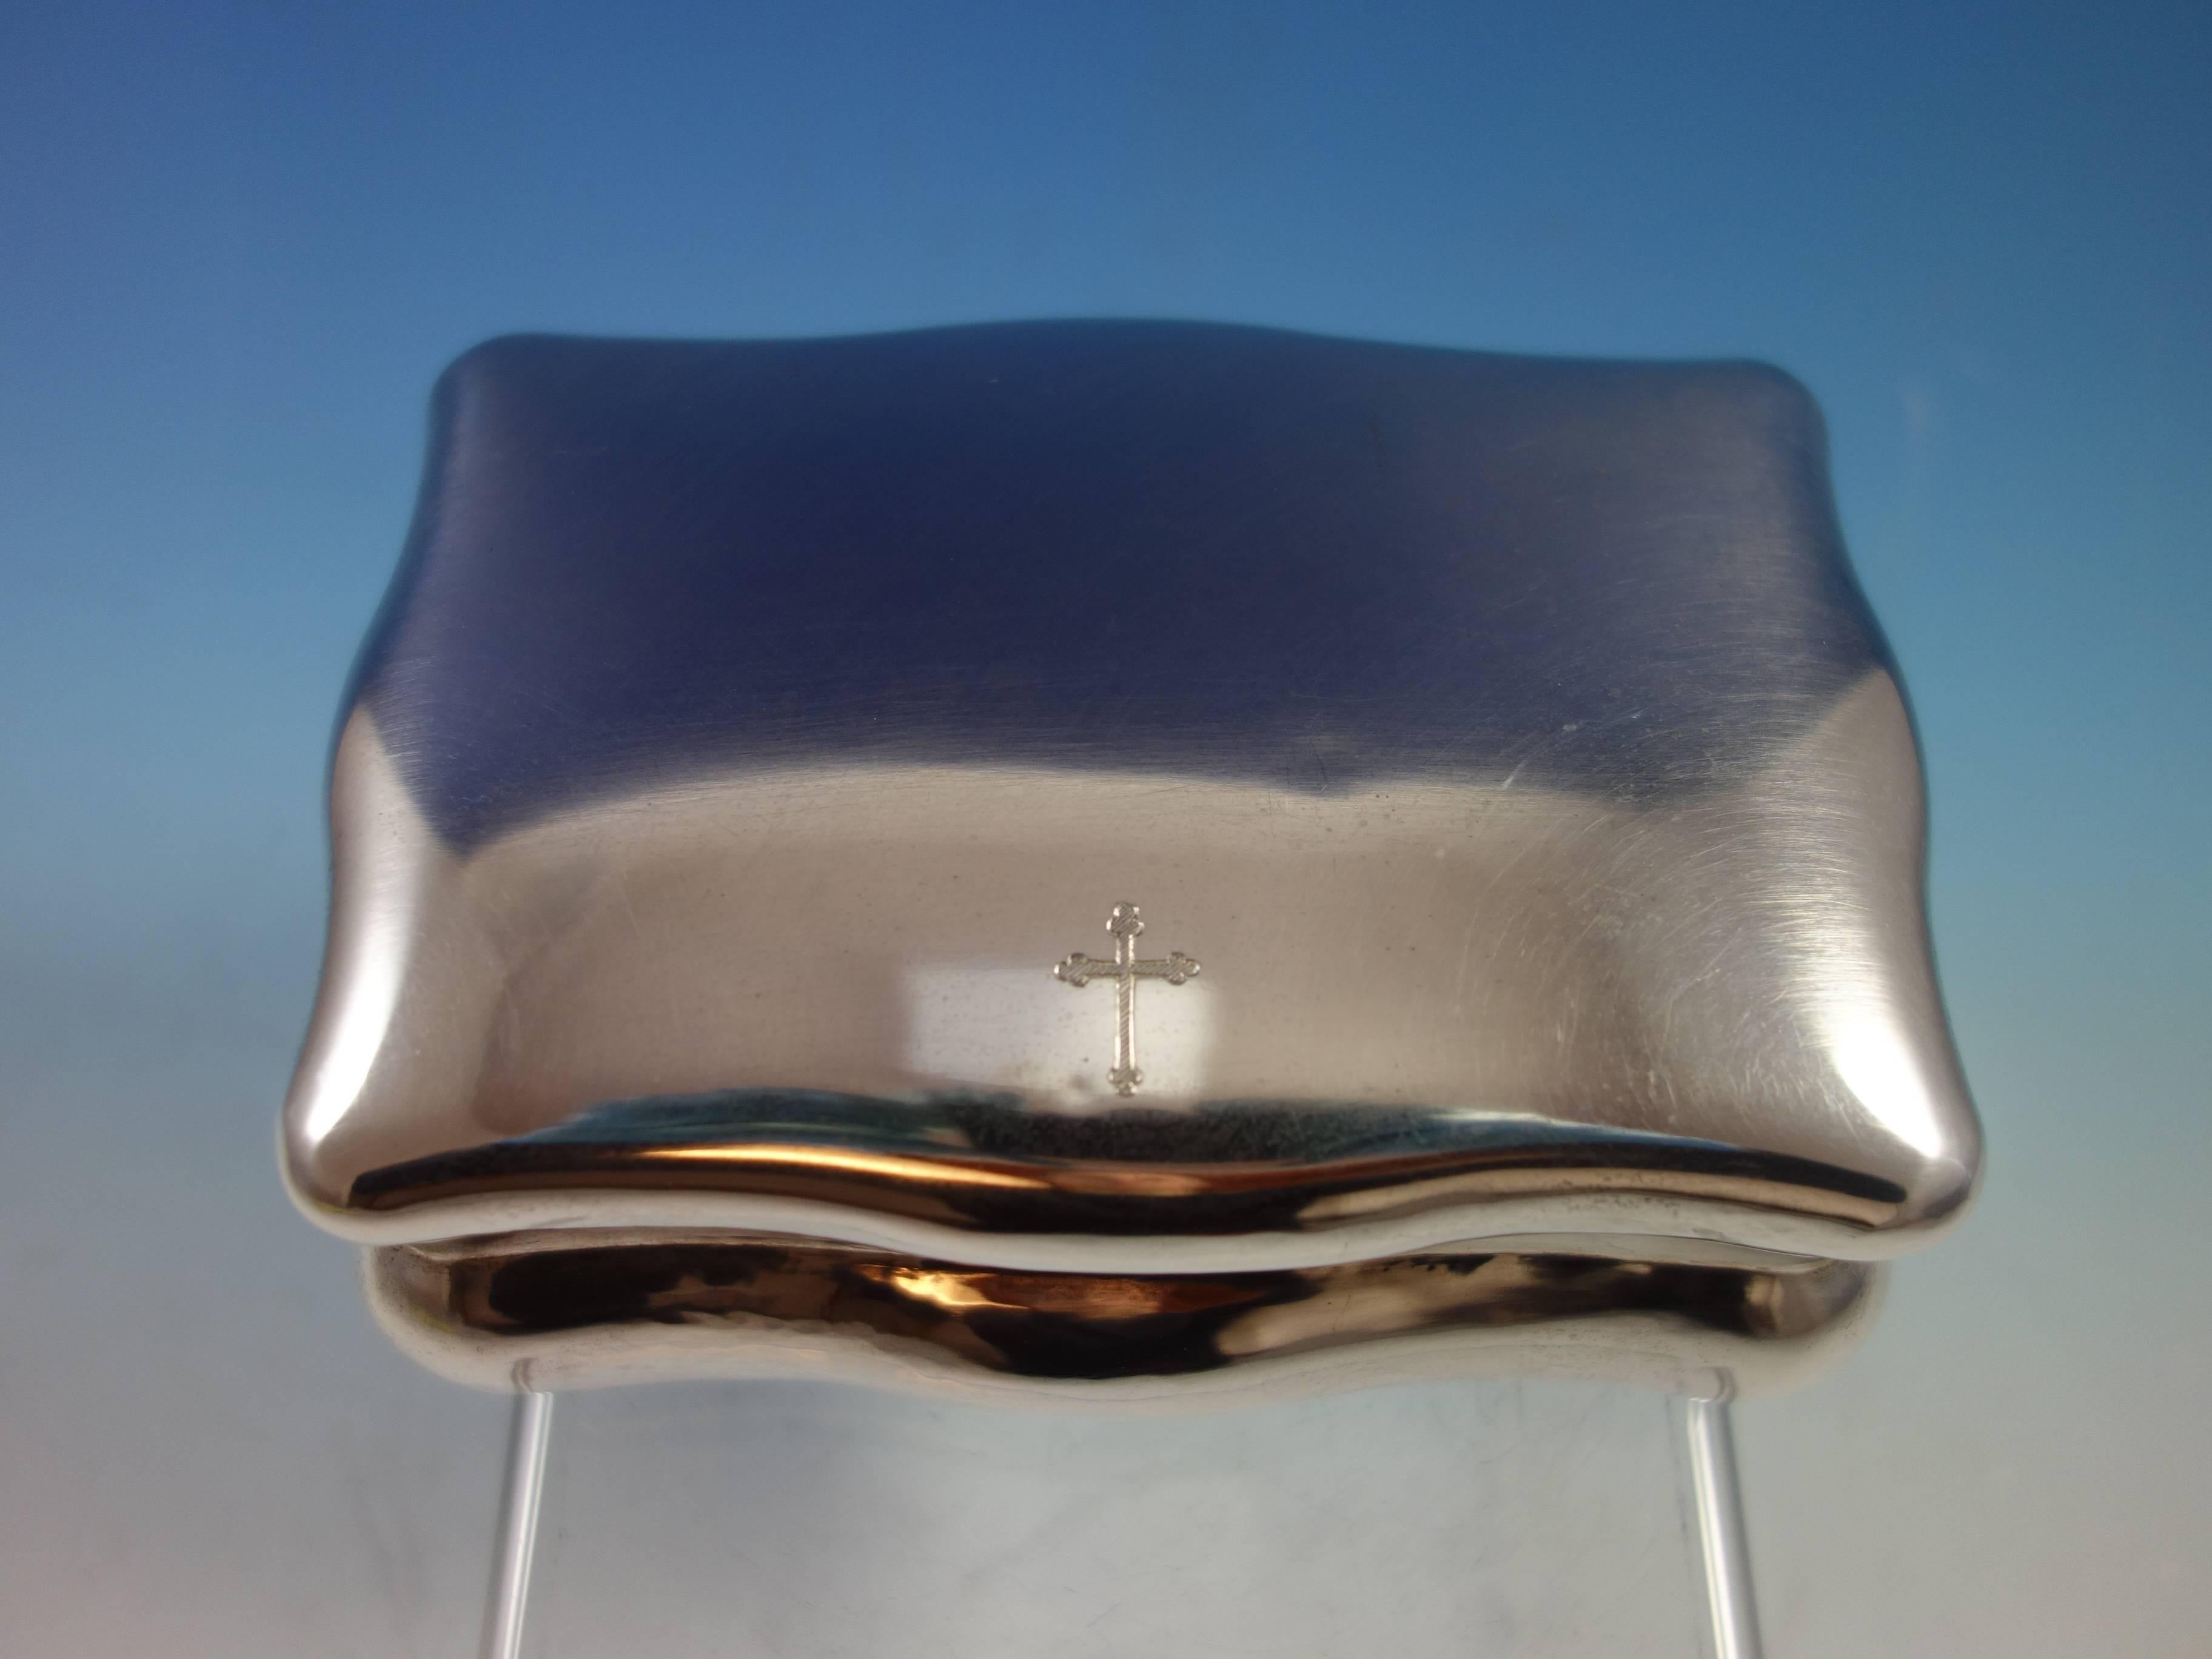 Fine Buccellati sterling silver jewelry box. The box has an etched cross on the top. It also has an inscription carved on the lip, inside edge of the cover that says, 